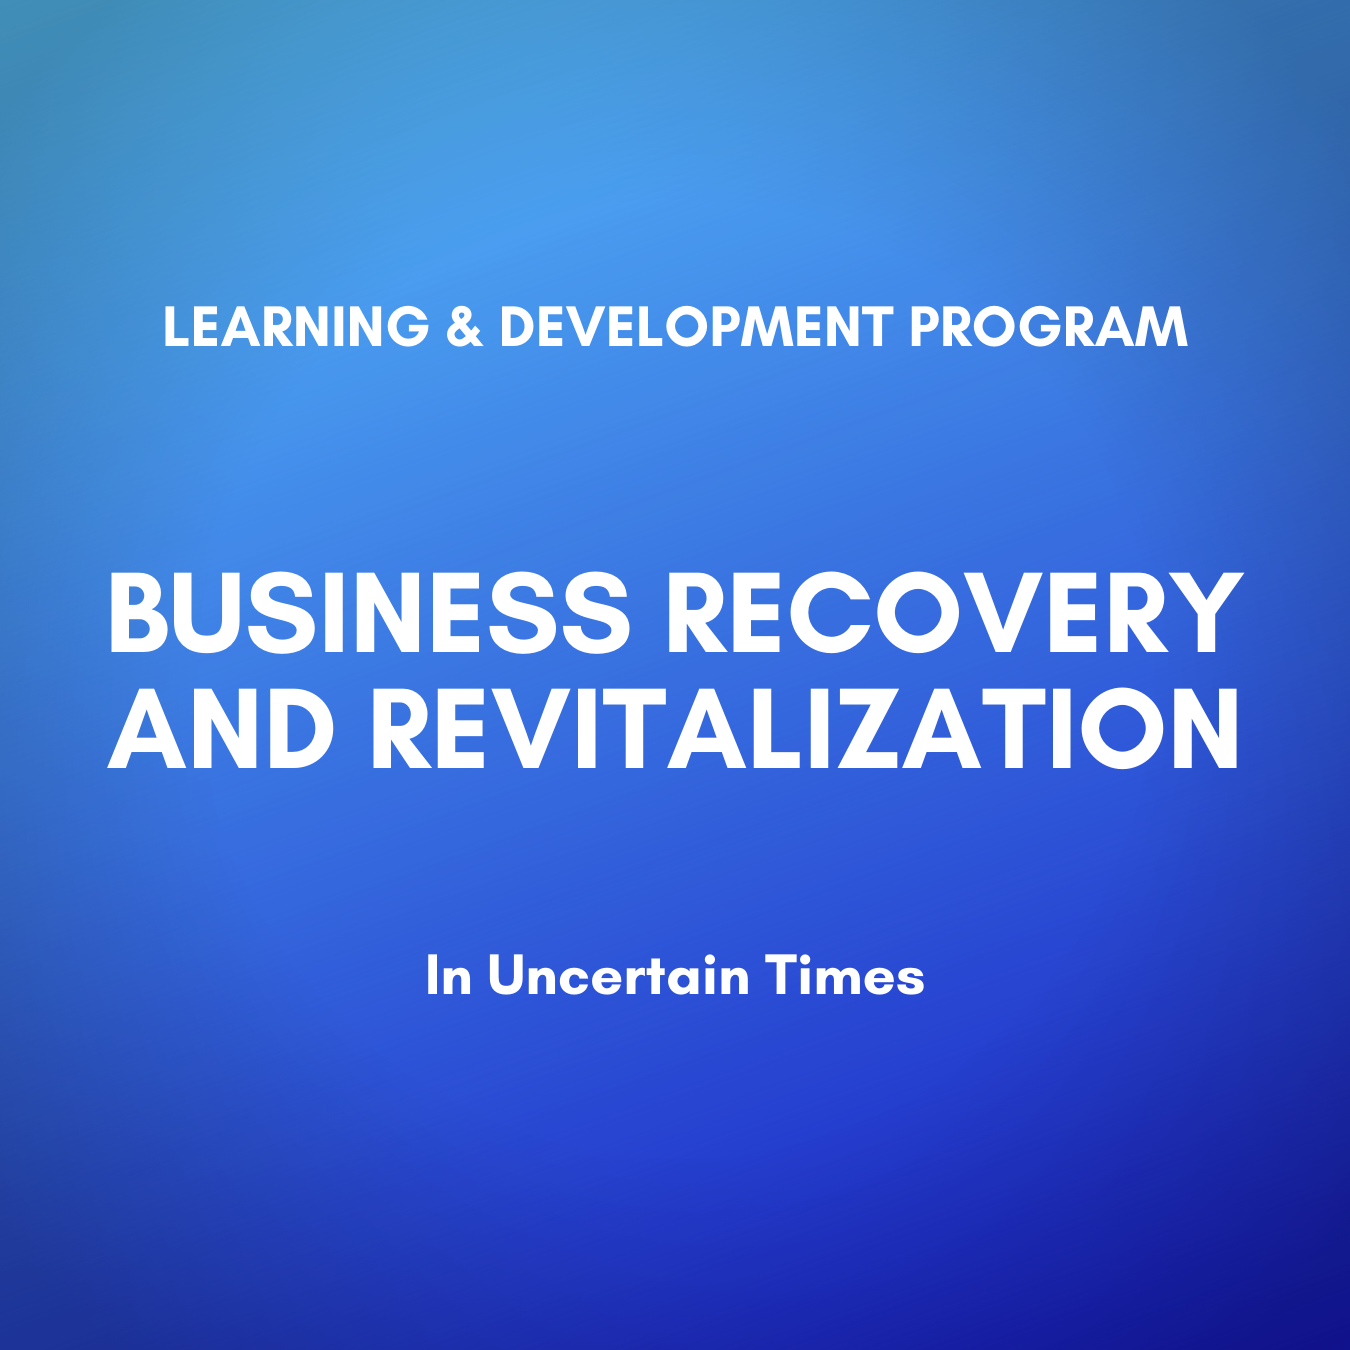 Business Recovery and Revitalization